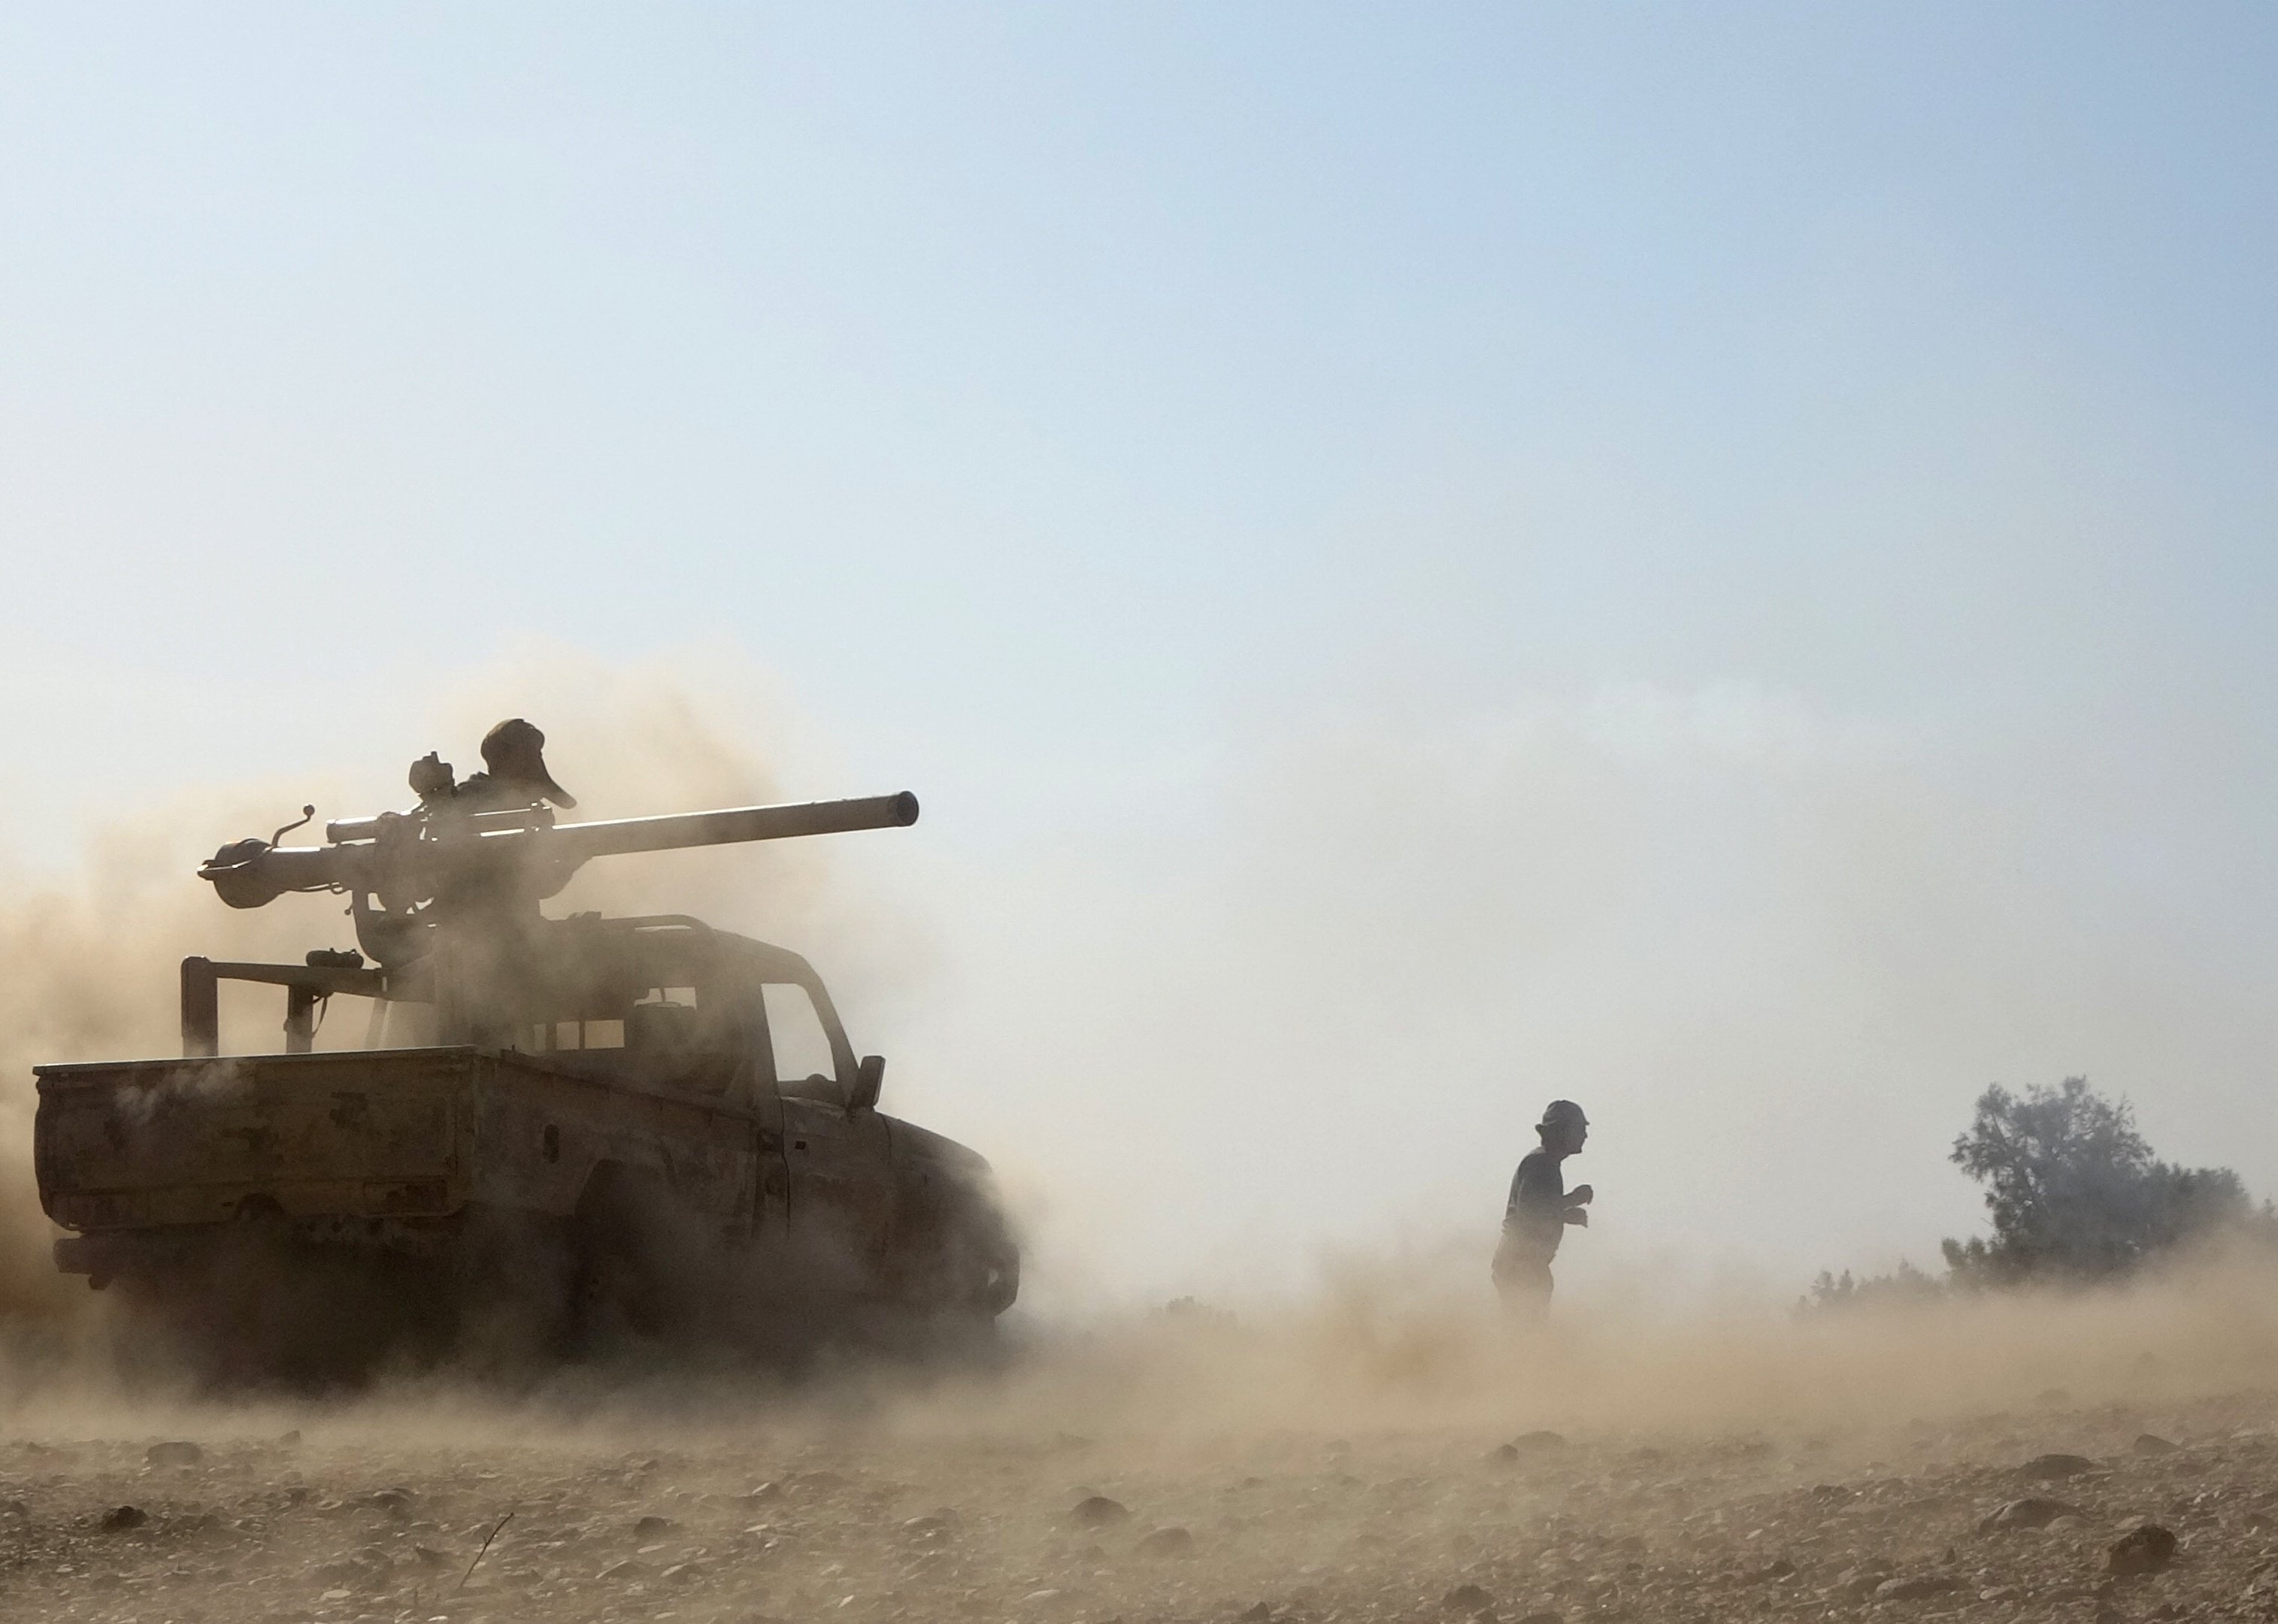 Government troops repel a Huthi rebel offensive on oil-rich Marib.